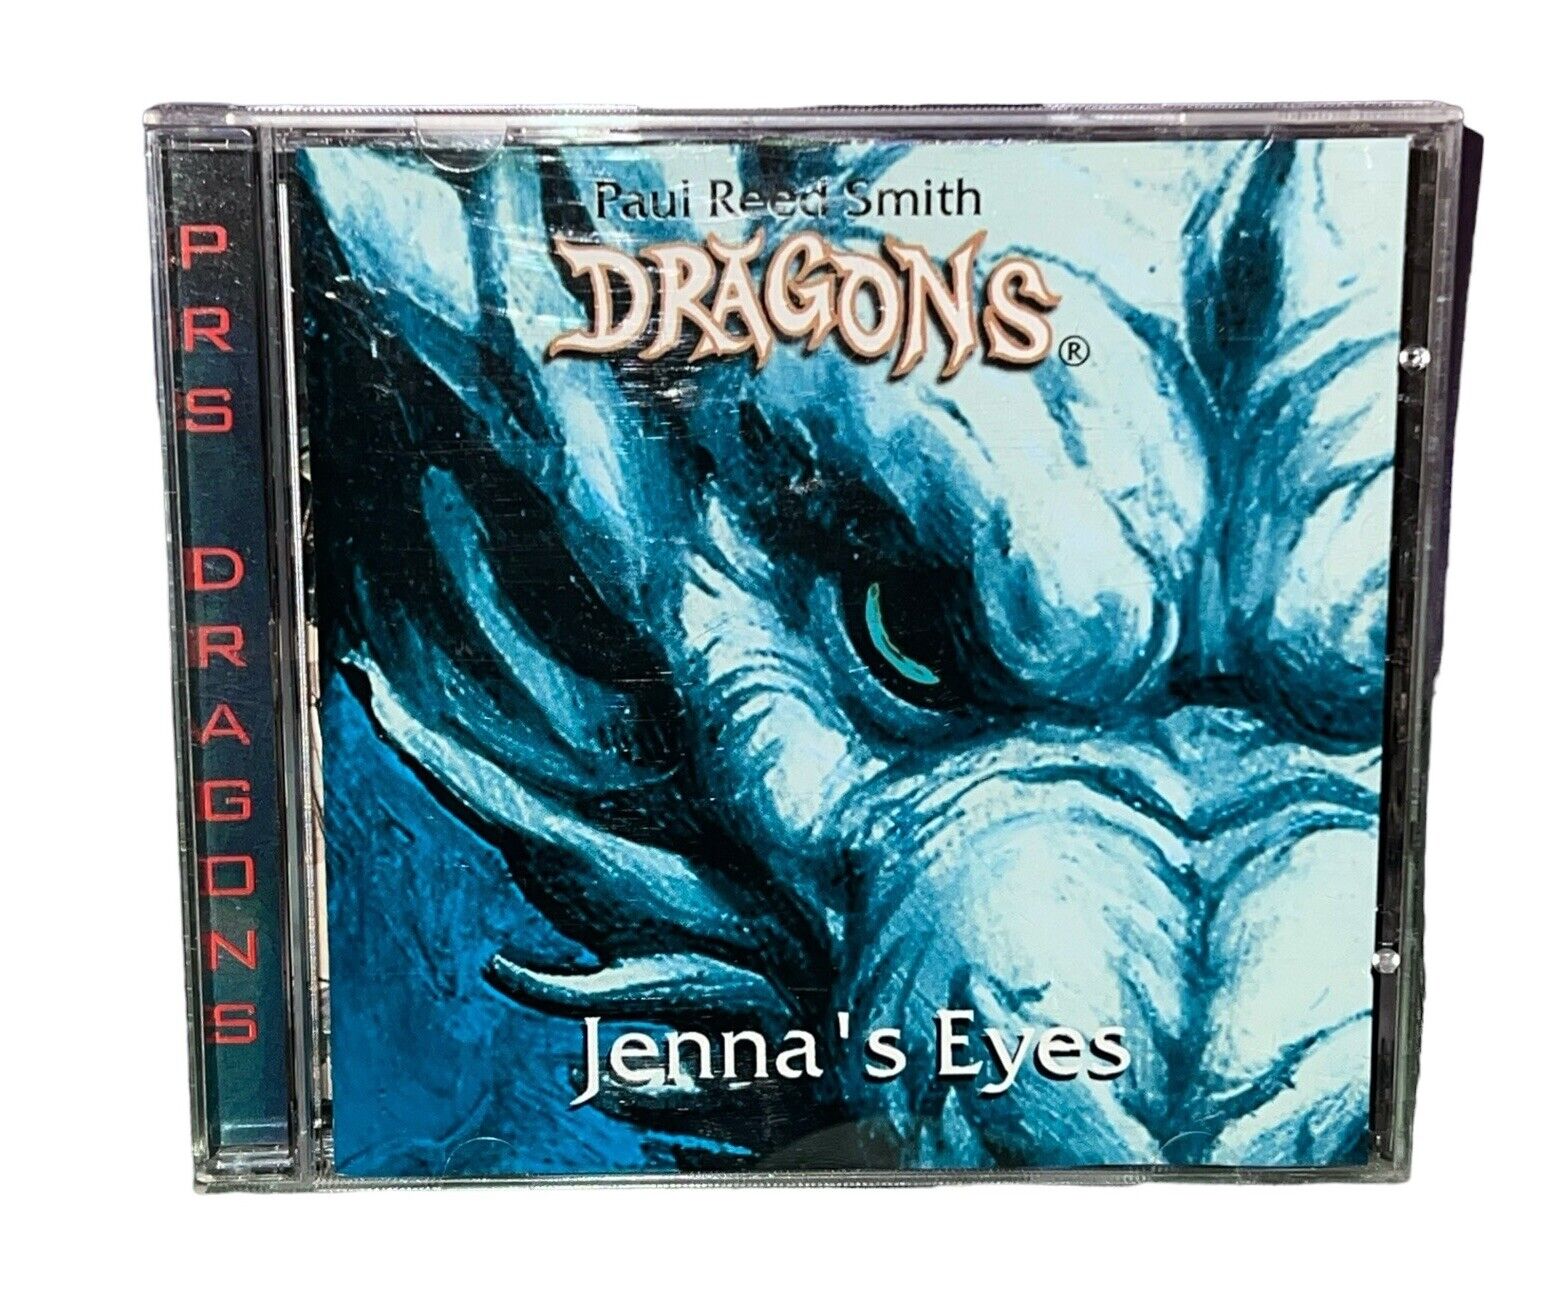 Paul Reed Smith Dragons - Jenna’s Eyes CD - Blue Cover